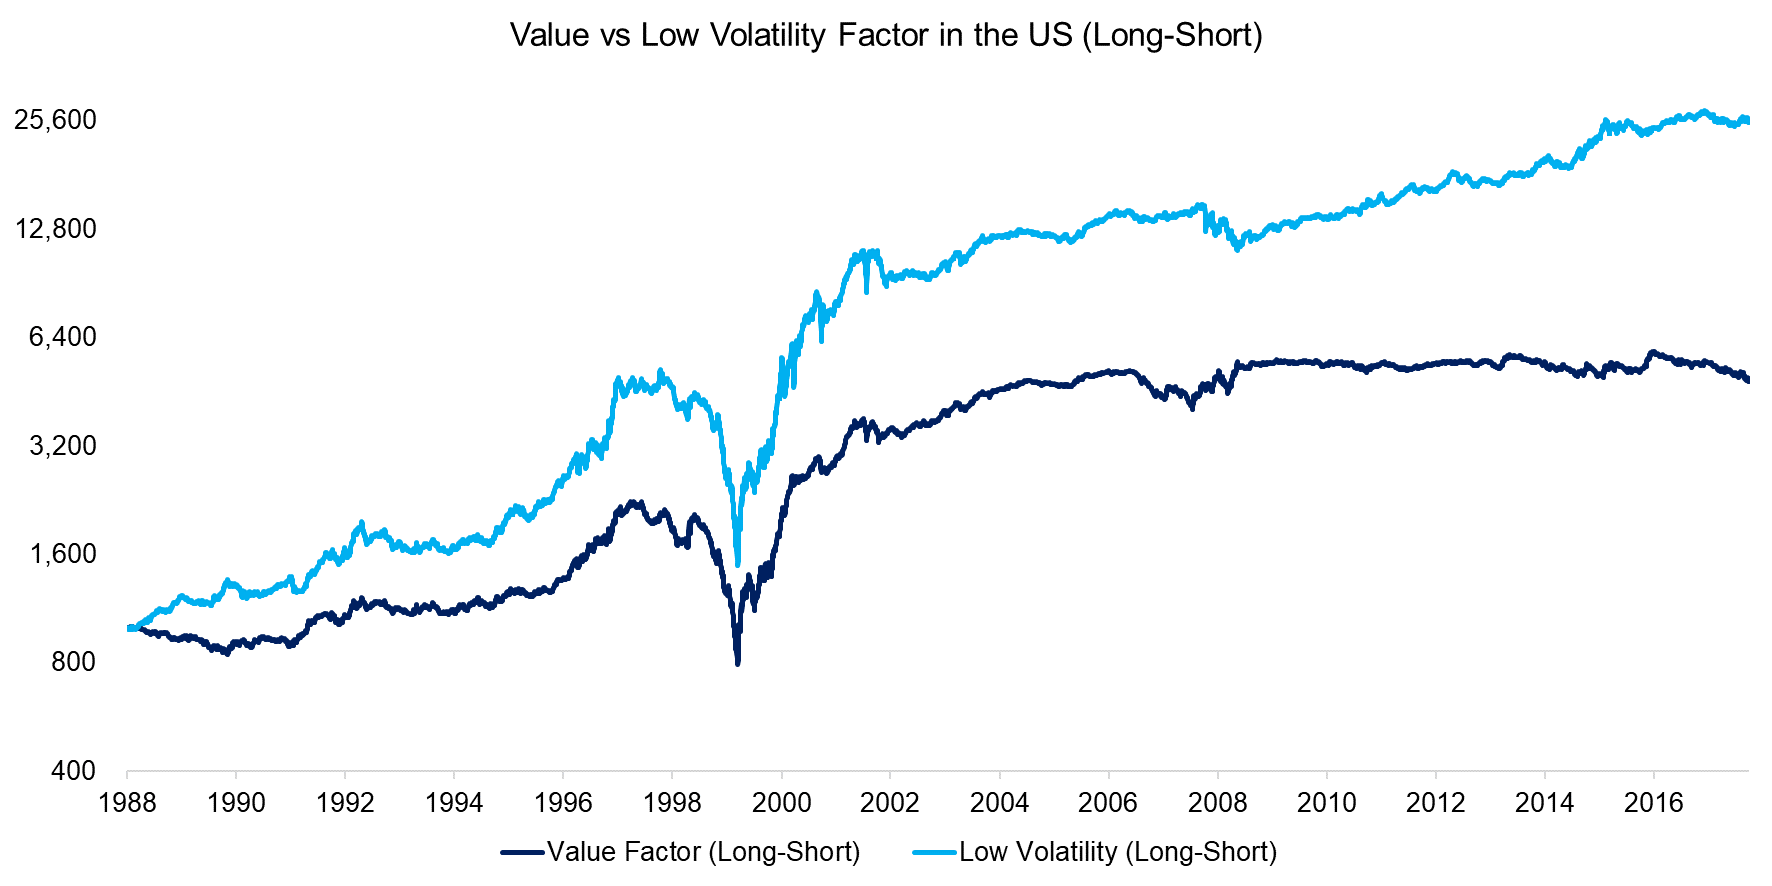 Value vs Low Volatility Factor in the US (Long-Short)